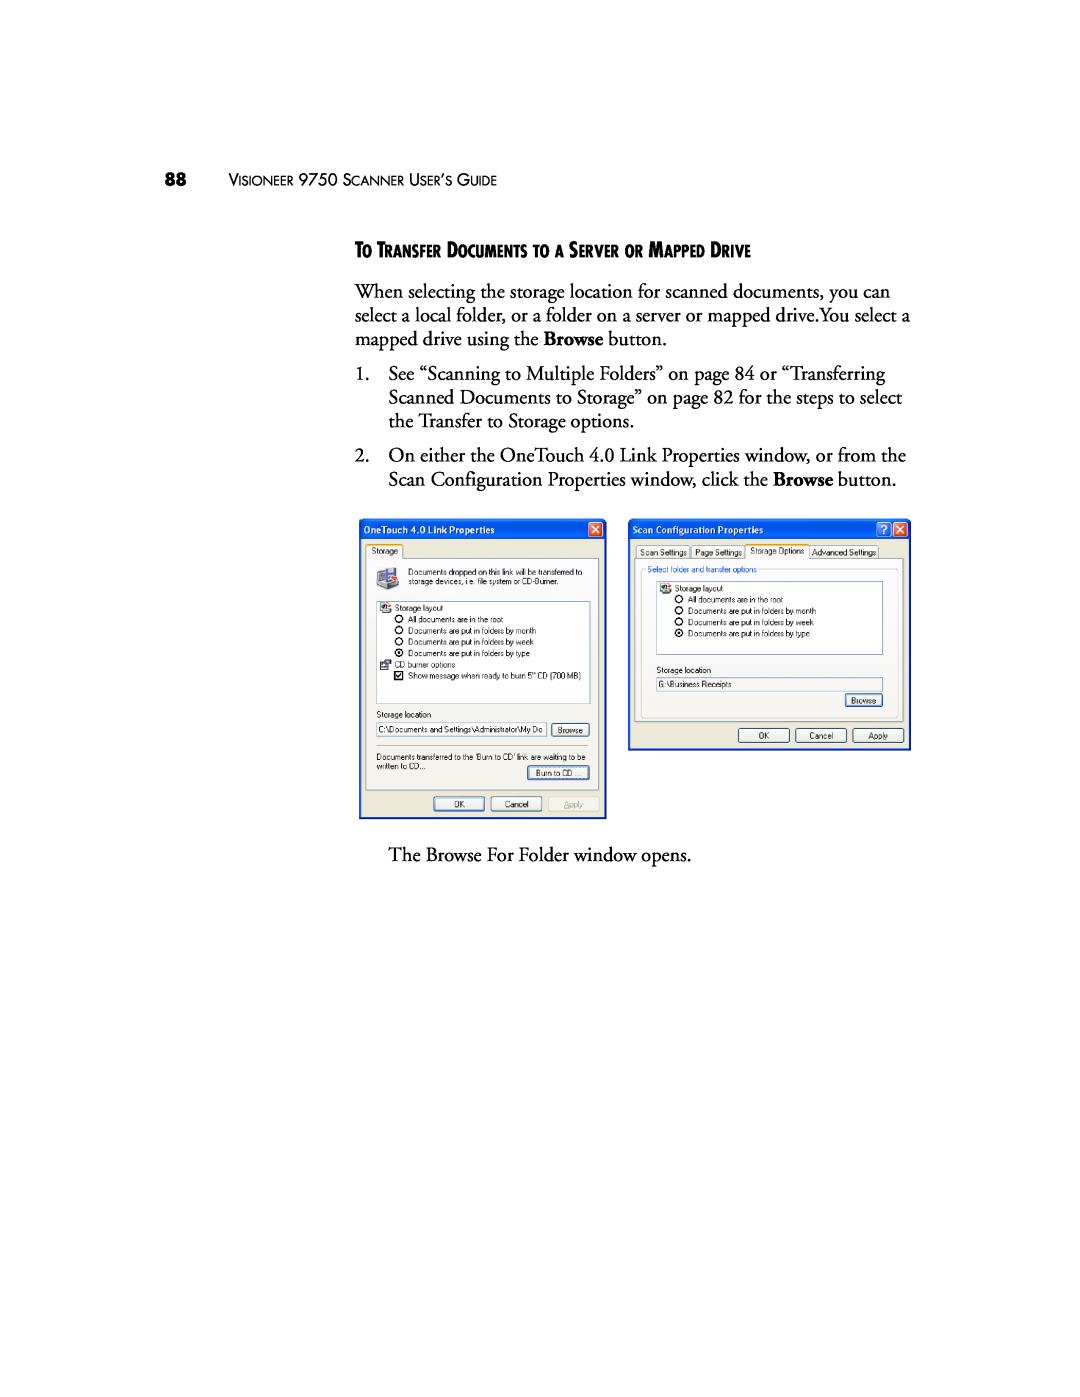 Visioneer 9750 manual The Browse For Folder window opens 